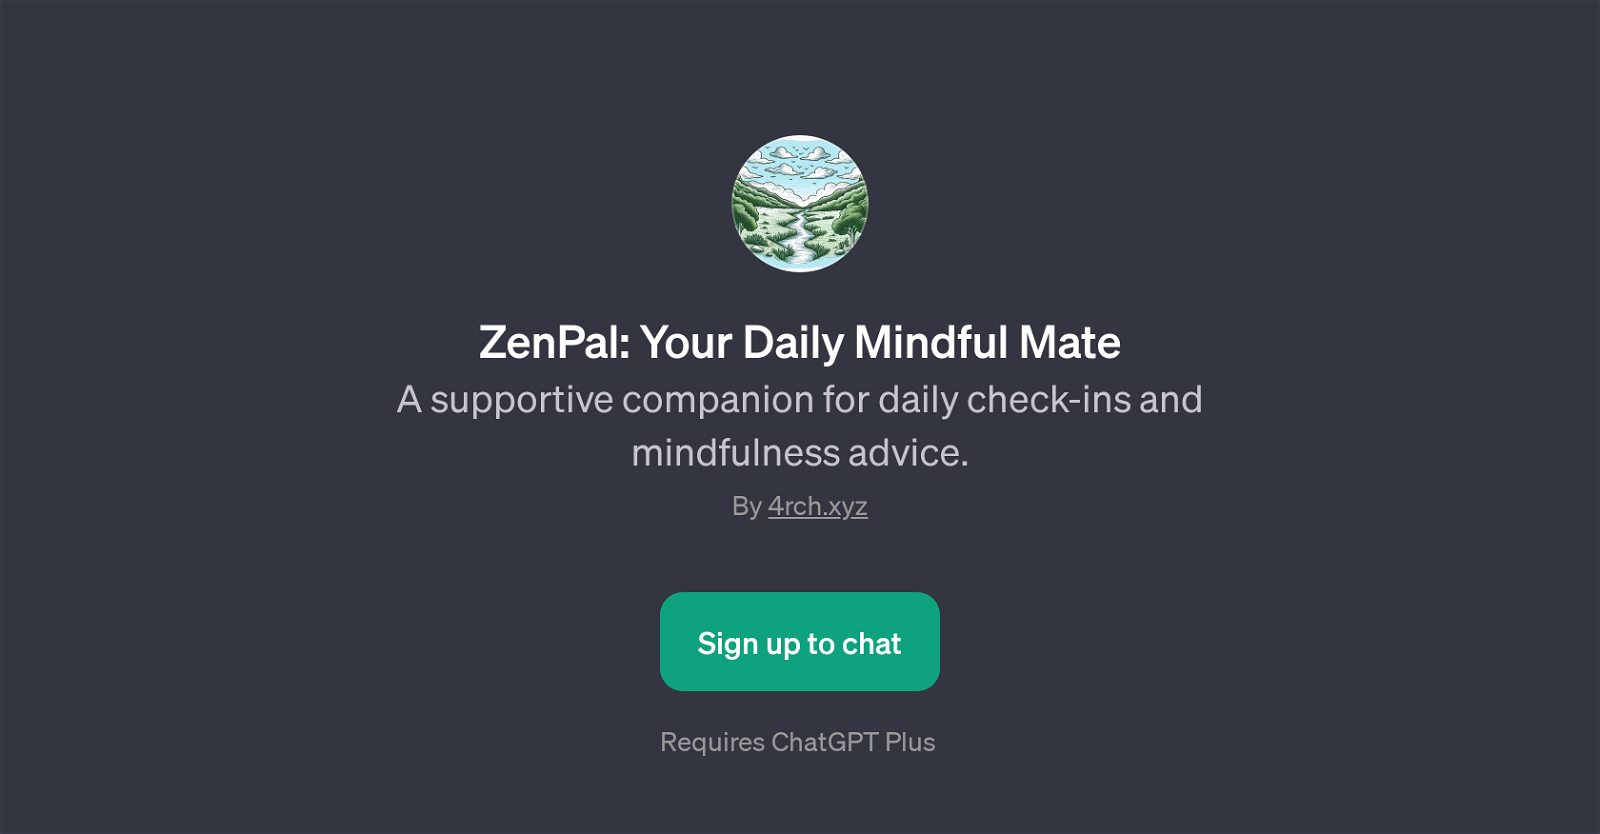 ZenPal: Your Daily Mindful Mate website